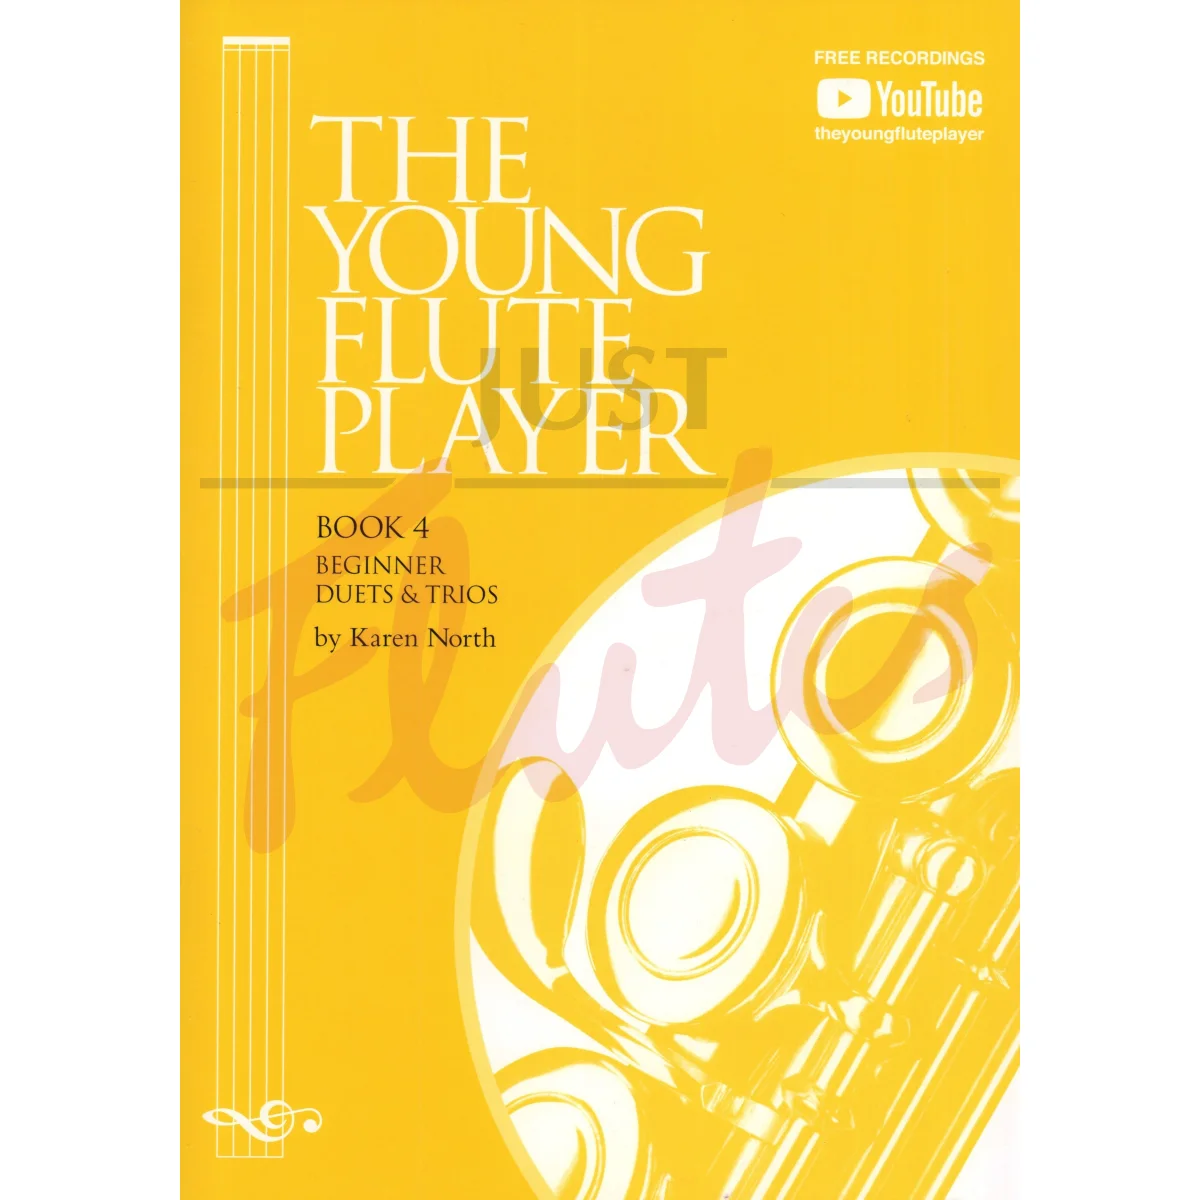 The Young Flute Player Book 4: Beginner Duets and Trios